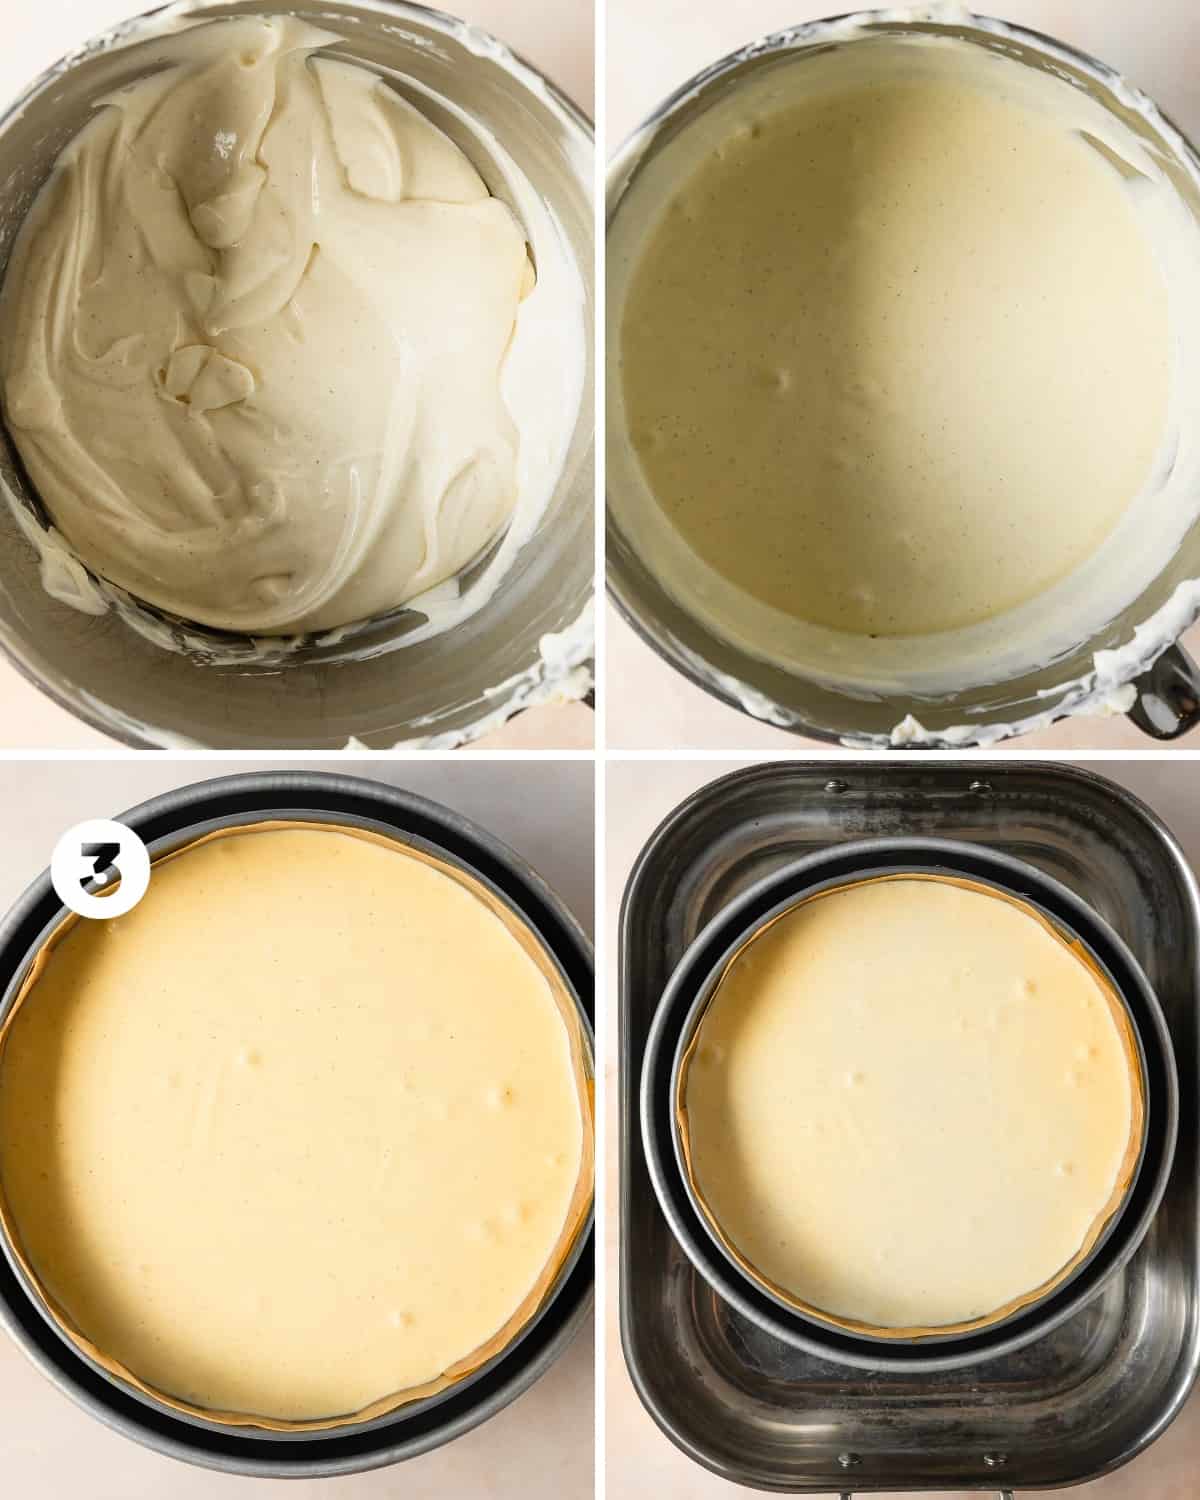 Pour the creamy vanilla cheesecake filling into the prepared cookie crust. If you haven’t done so yet, place the springform pan into a larger 10” cake pan. Then place the cheesecake into a large roasting pan filled with very hot water.